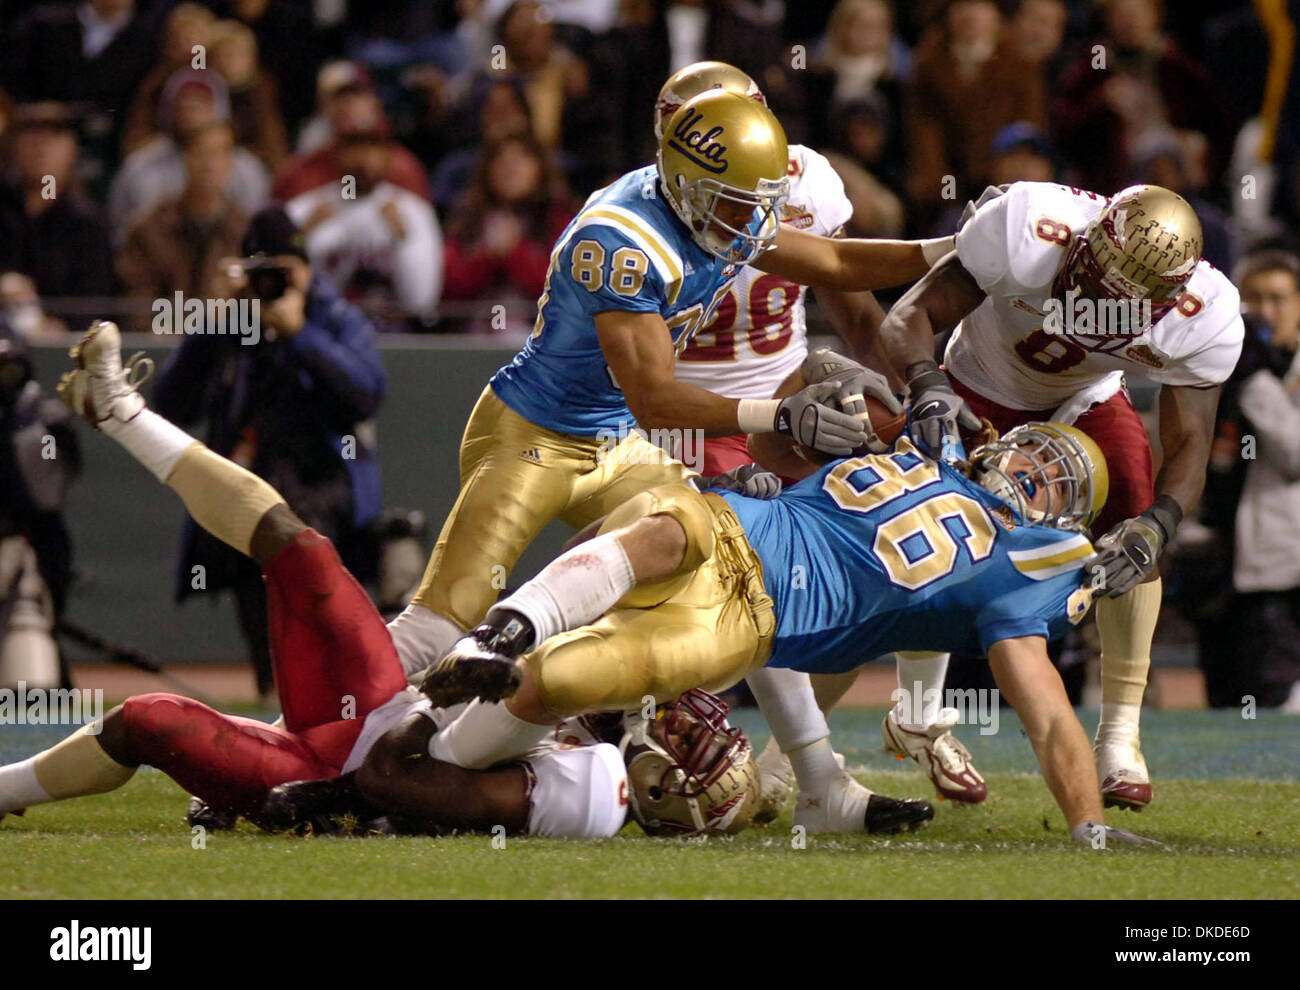 Dec 27, 2006; San Francisco, CA, USA; #86 LOGAN PAULSEN Of UCLA leans for second quarter yardage against #3 MYRON ROLLE and #8 ROGER WILLIAMS of Florida State in the Emerald Bowl on Wednesday, Dec. 27, 2006, at AT&T Park. Mandatory Credit: Photo by Karl Mondon/Contra Costa Times/ZUMA Press. (©) Copyright 2006 by Contra Costa Times Stock Photo